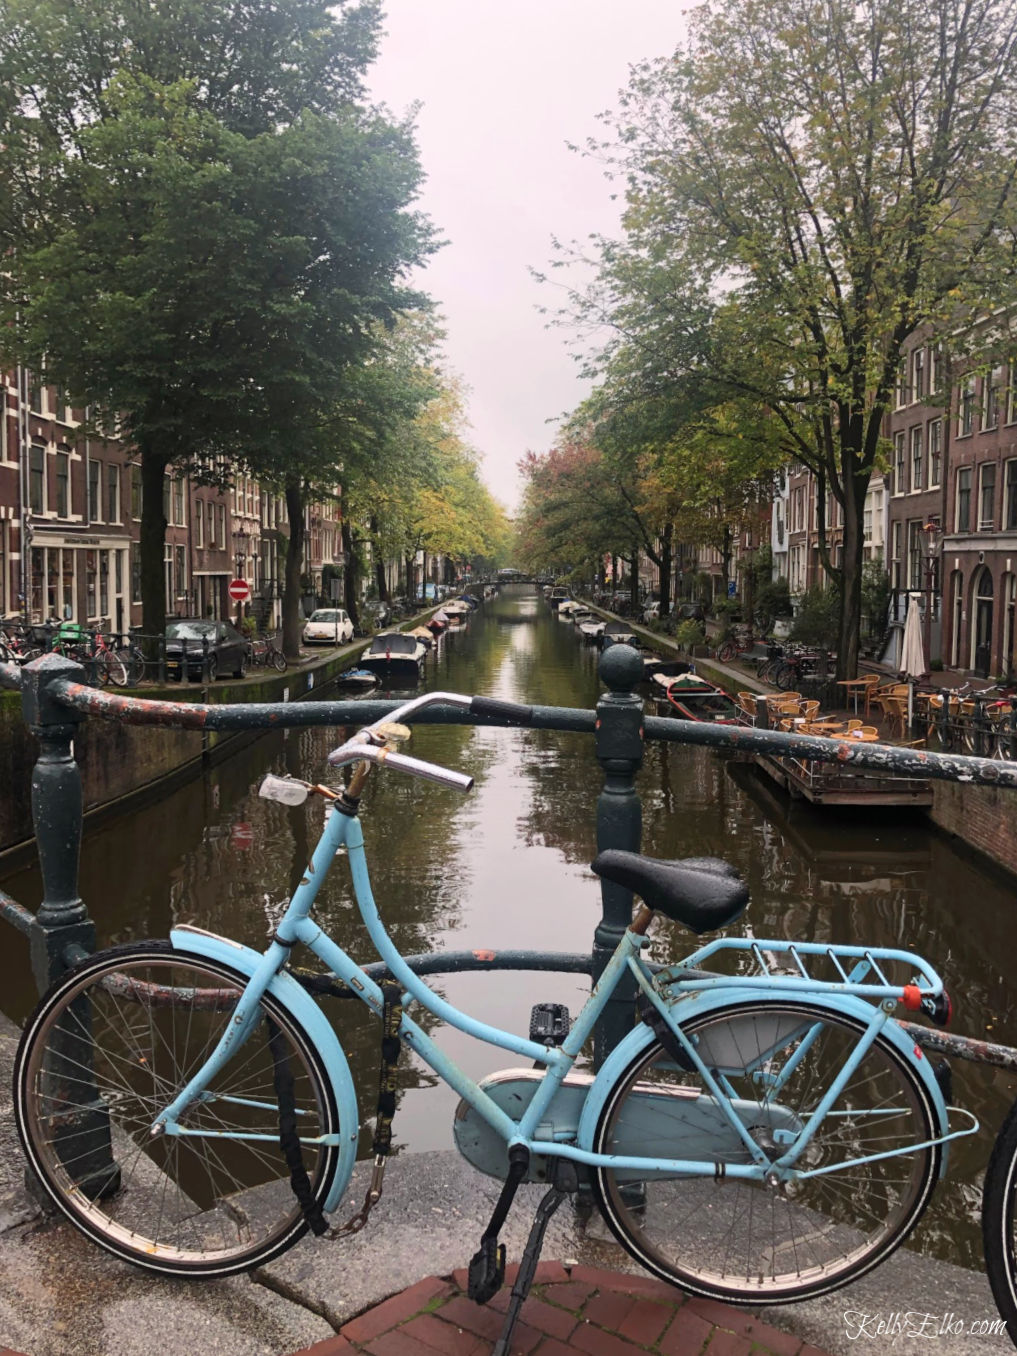 Amsterdam has 165 canals and more bikes than people! kellyelko.com #amsterdam #netherlands #canals #amsterdambike #amsterdamcanal #travel #travelblog #travelblogger #kellyelko